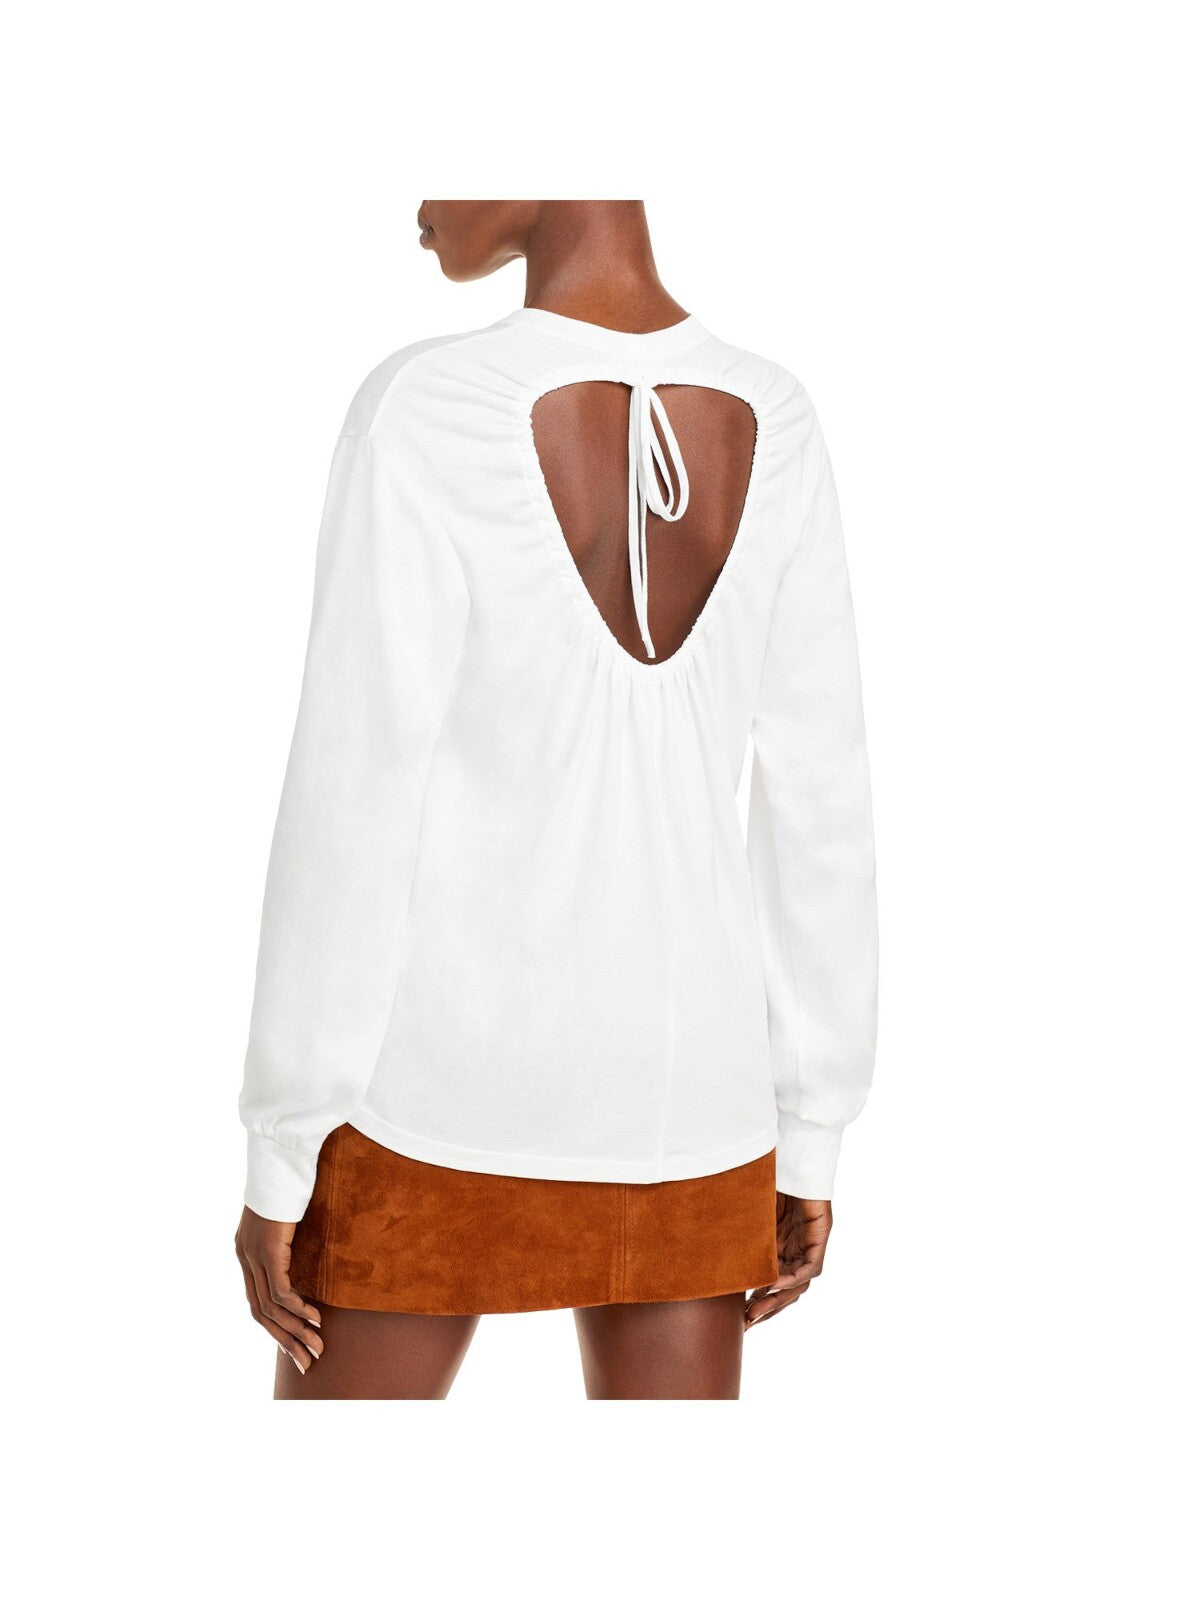 A.L.C Womens White Cut Out Tie Long Sleeve Crew Neck Top M